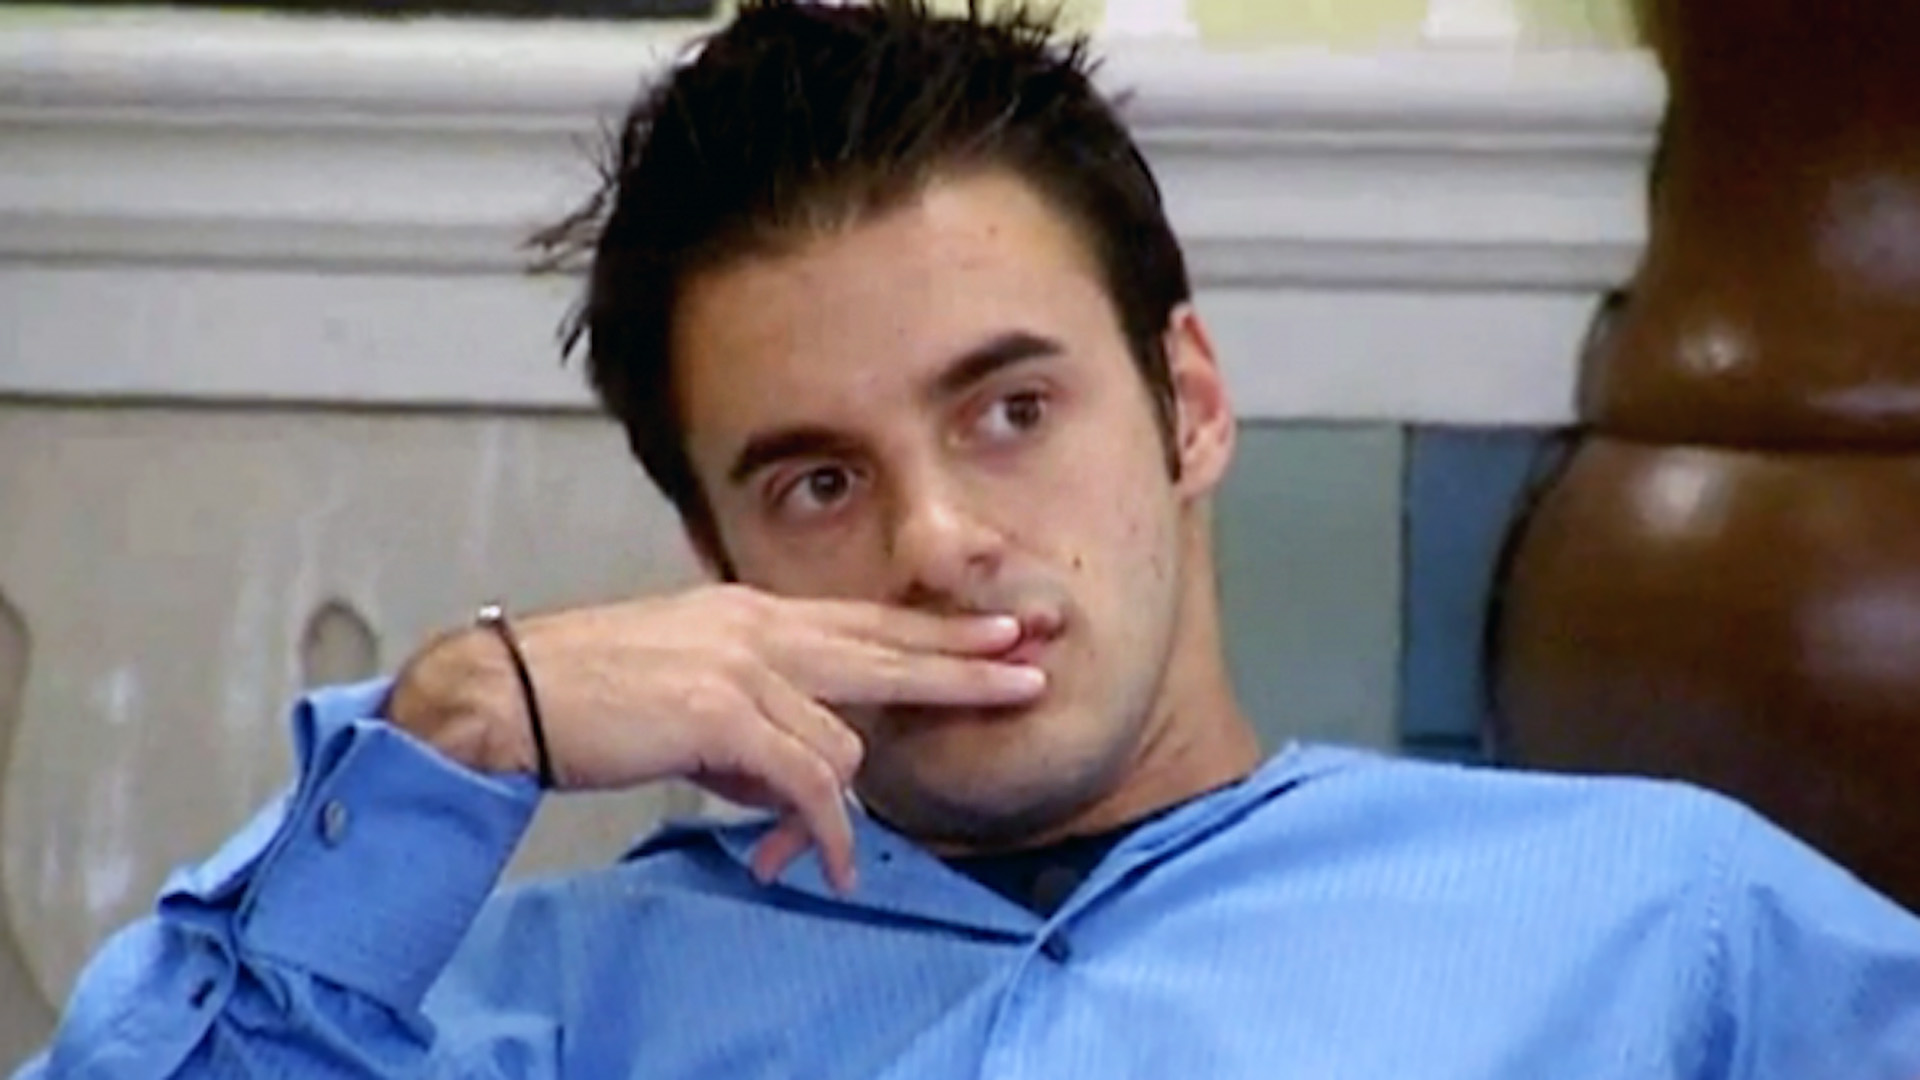 Who could forget these amazing Big Brother moments?